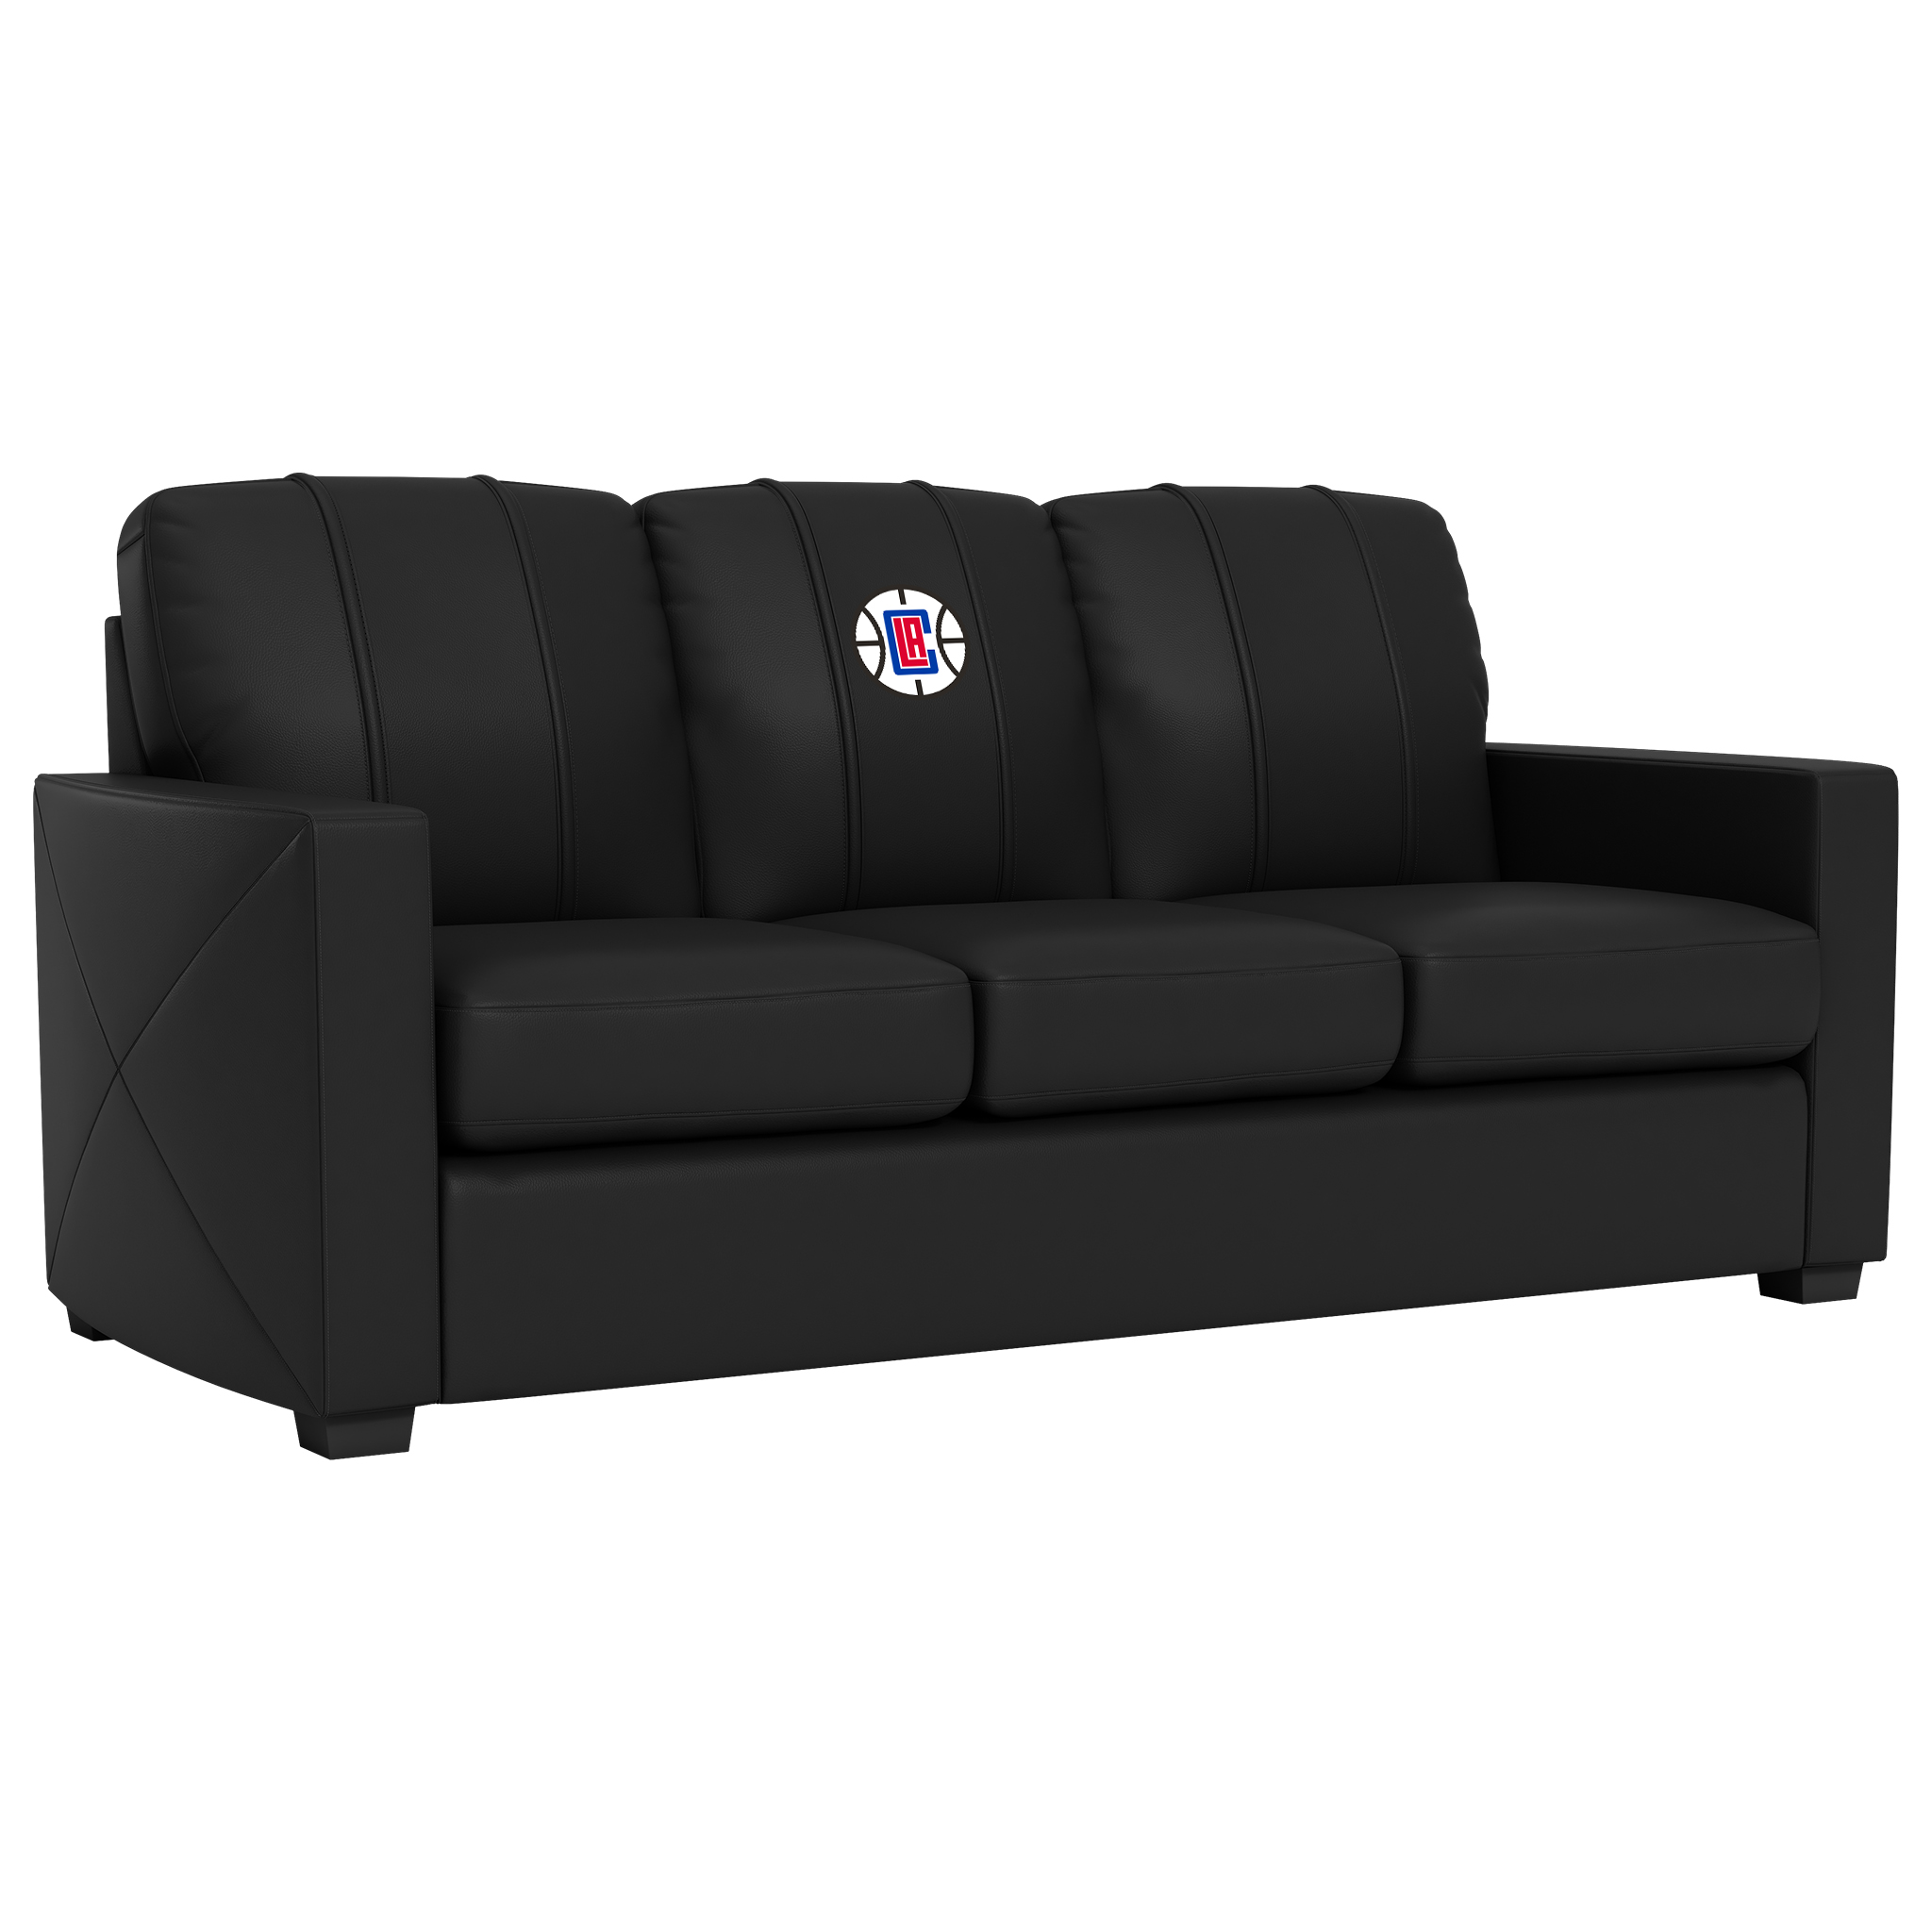 Los Angeles Clippers Silver Sofa with Los Angeles Clippers Primary